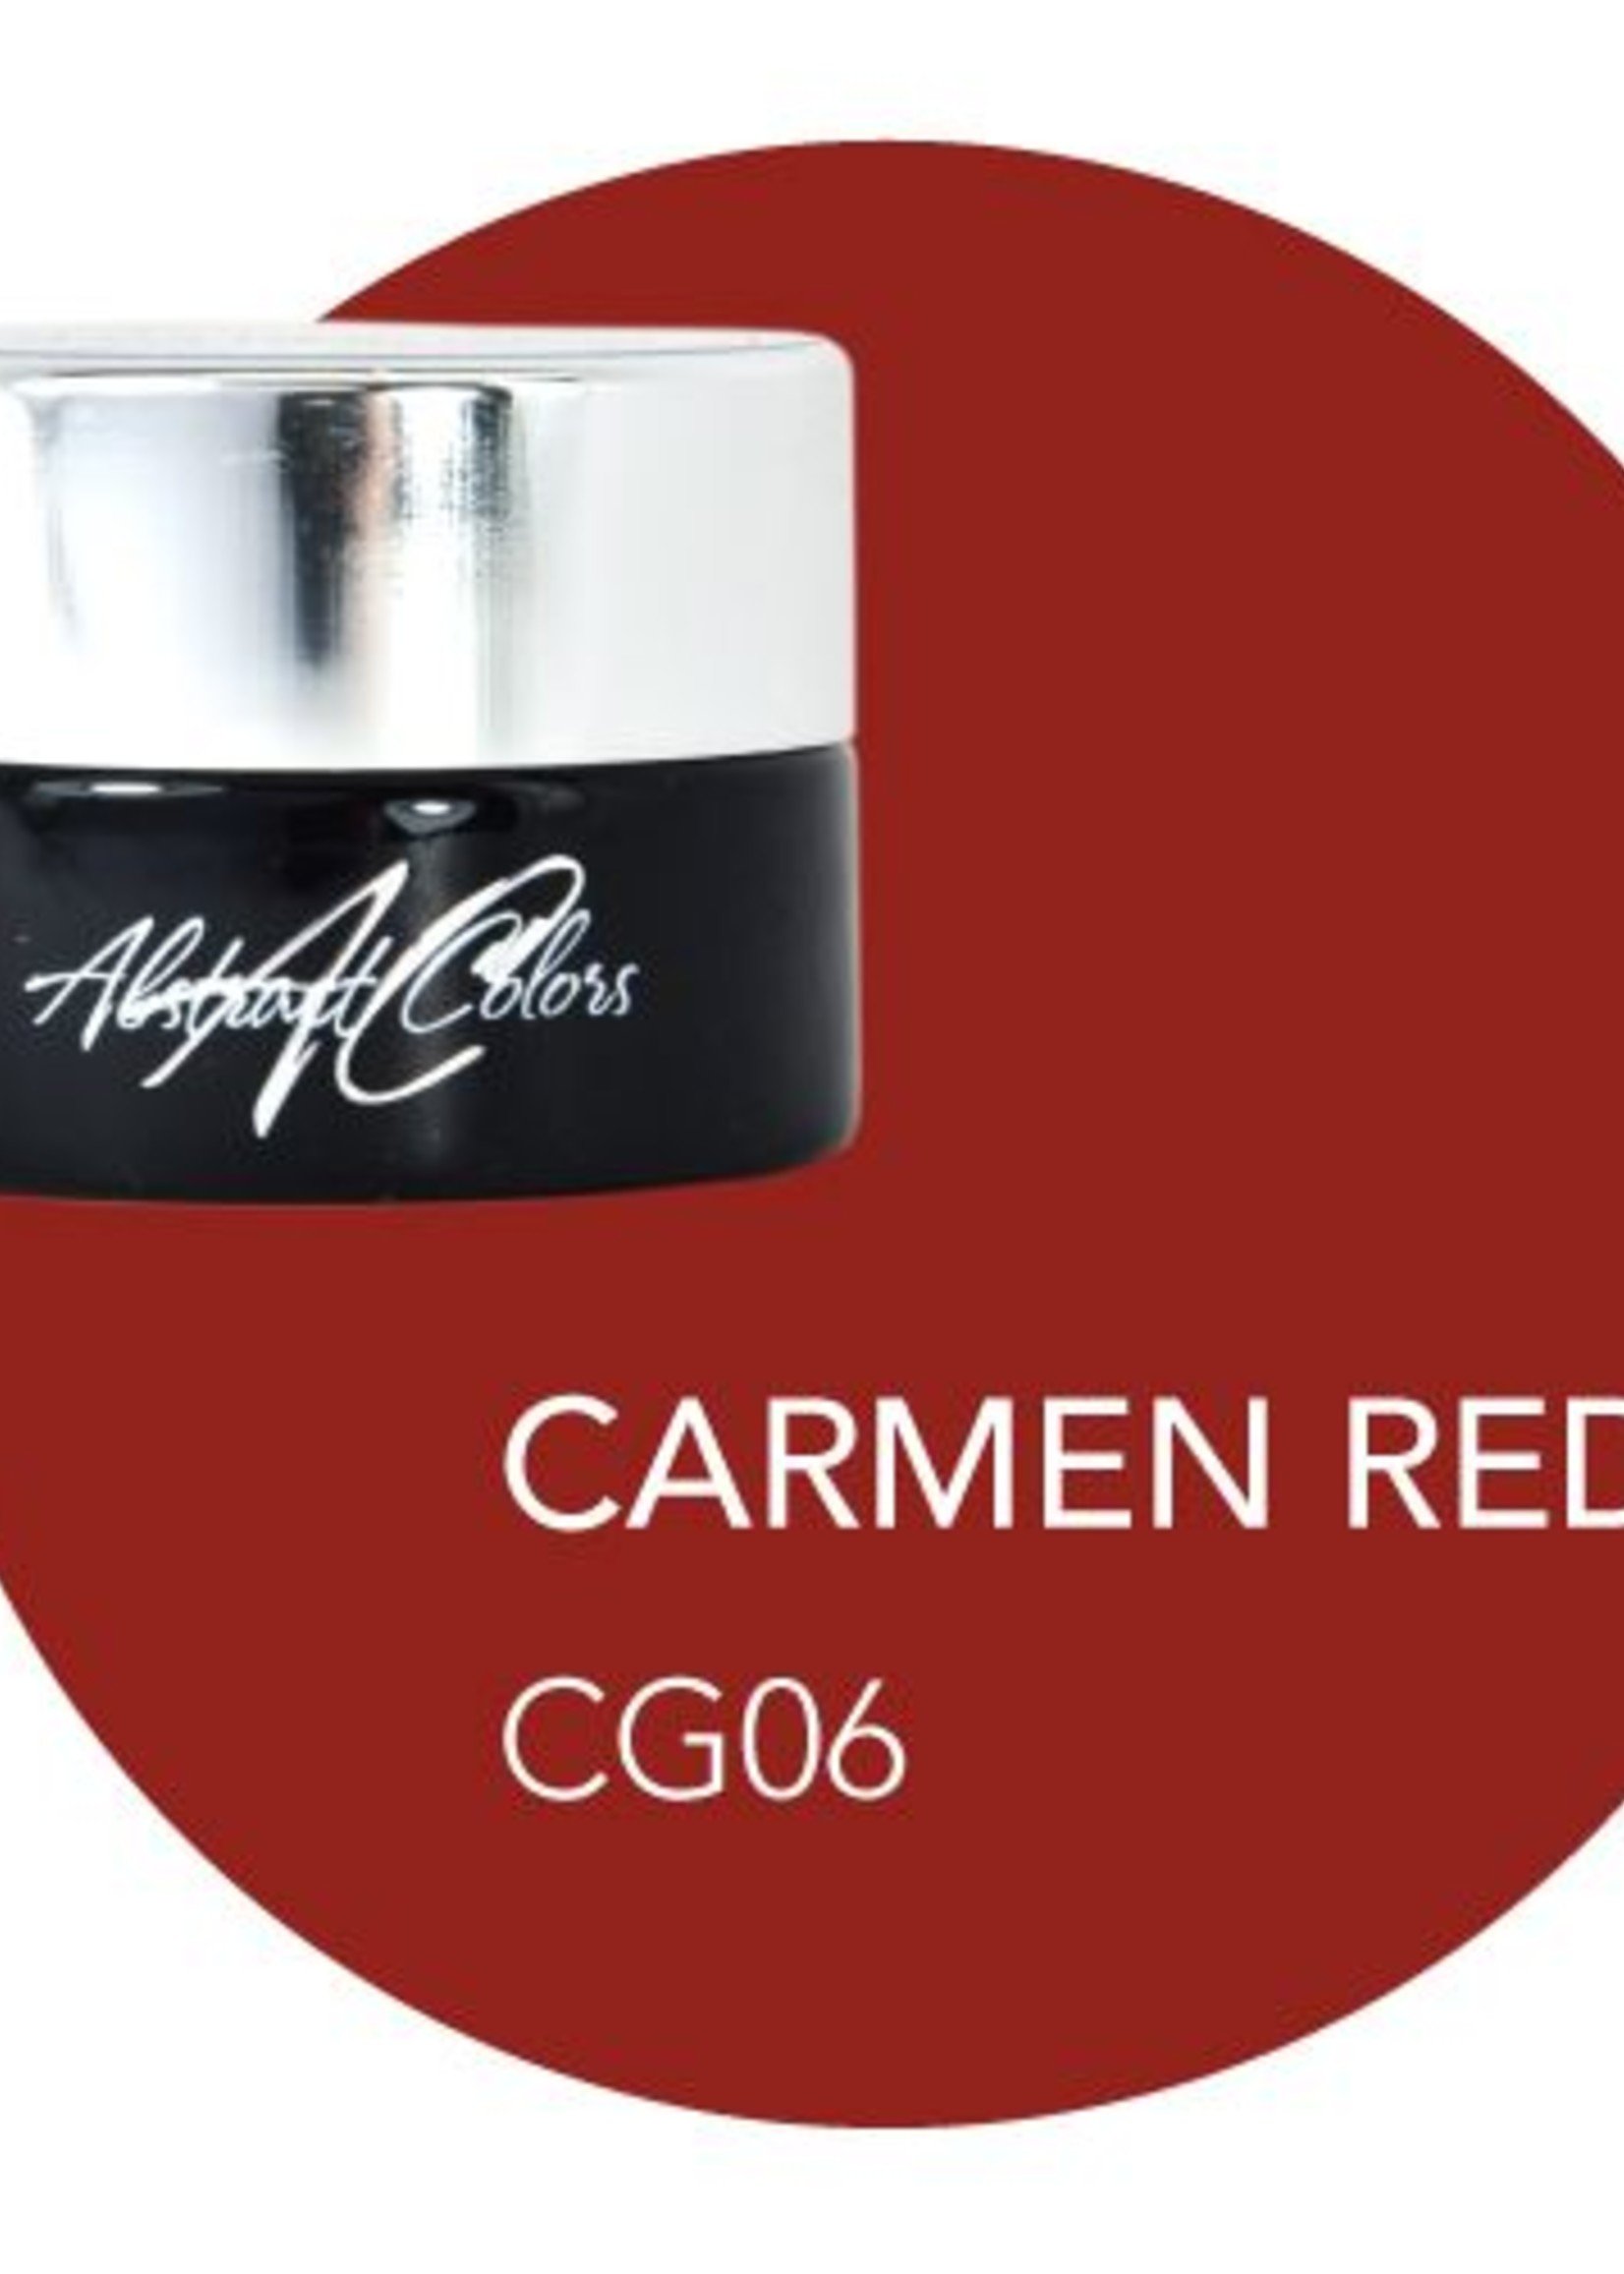 Abstract® Abstract colorgel Carmen red CG06